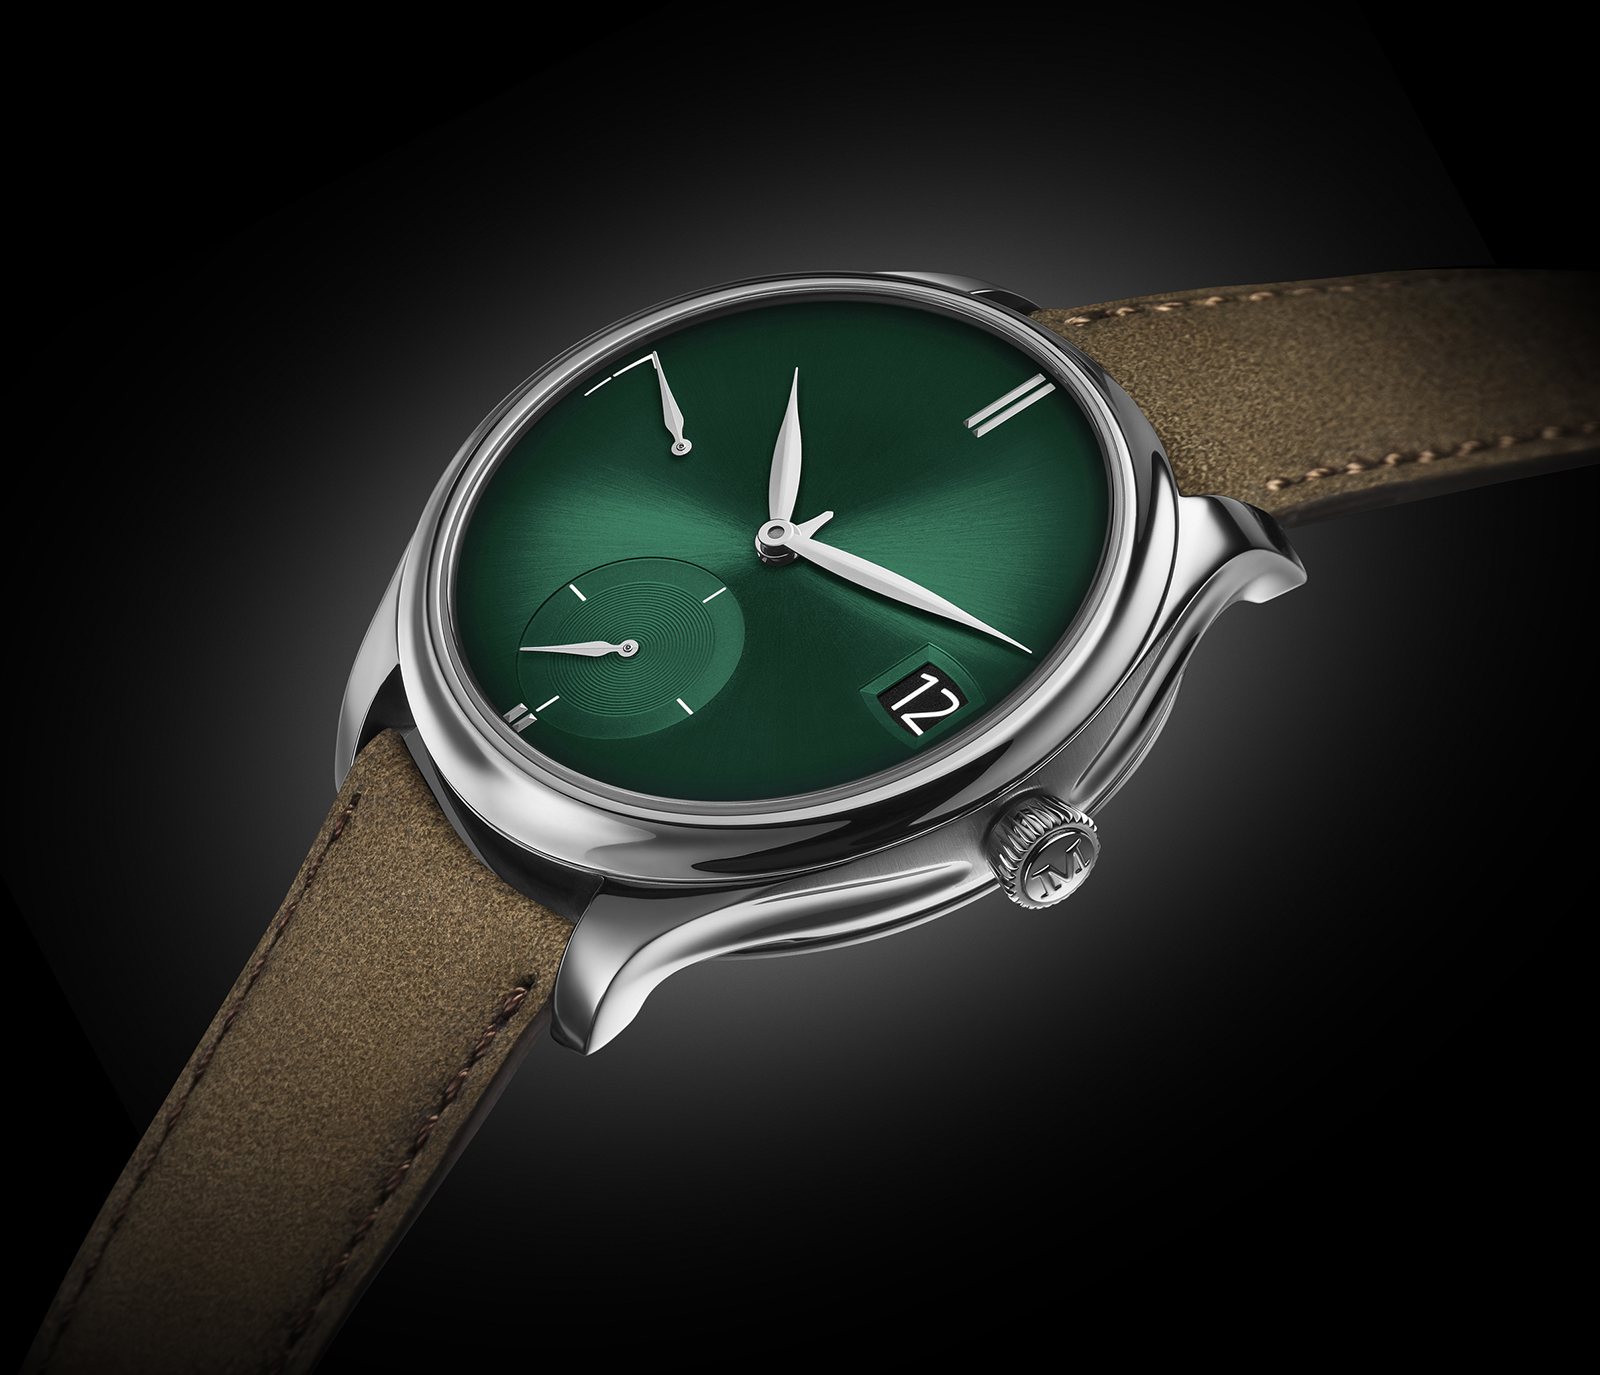 Baselworld 2018: H. Moser & Cie. Introduces the Endeavour Perpetual in ...